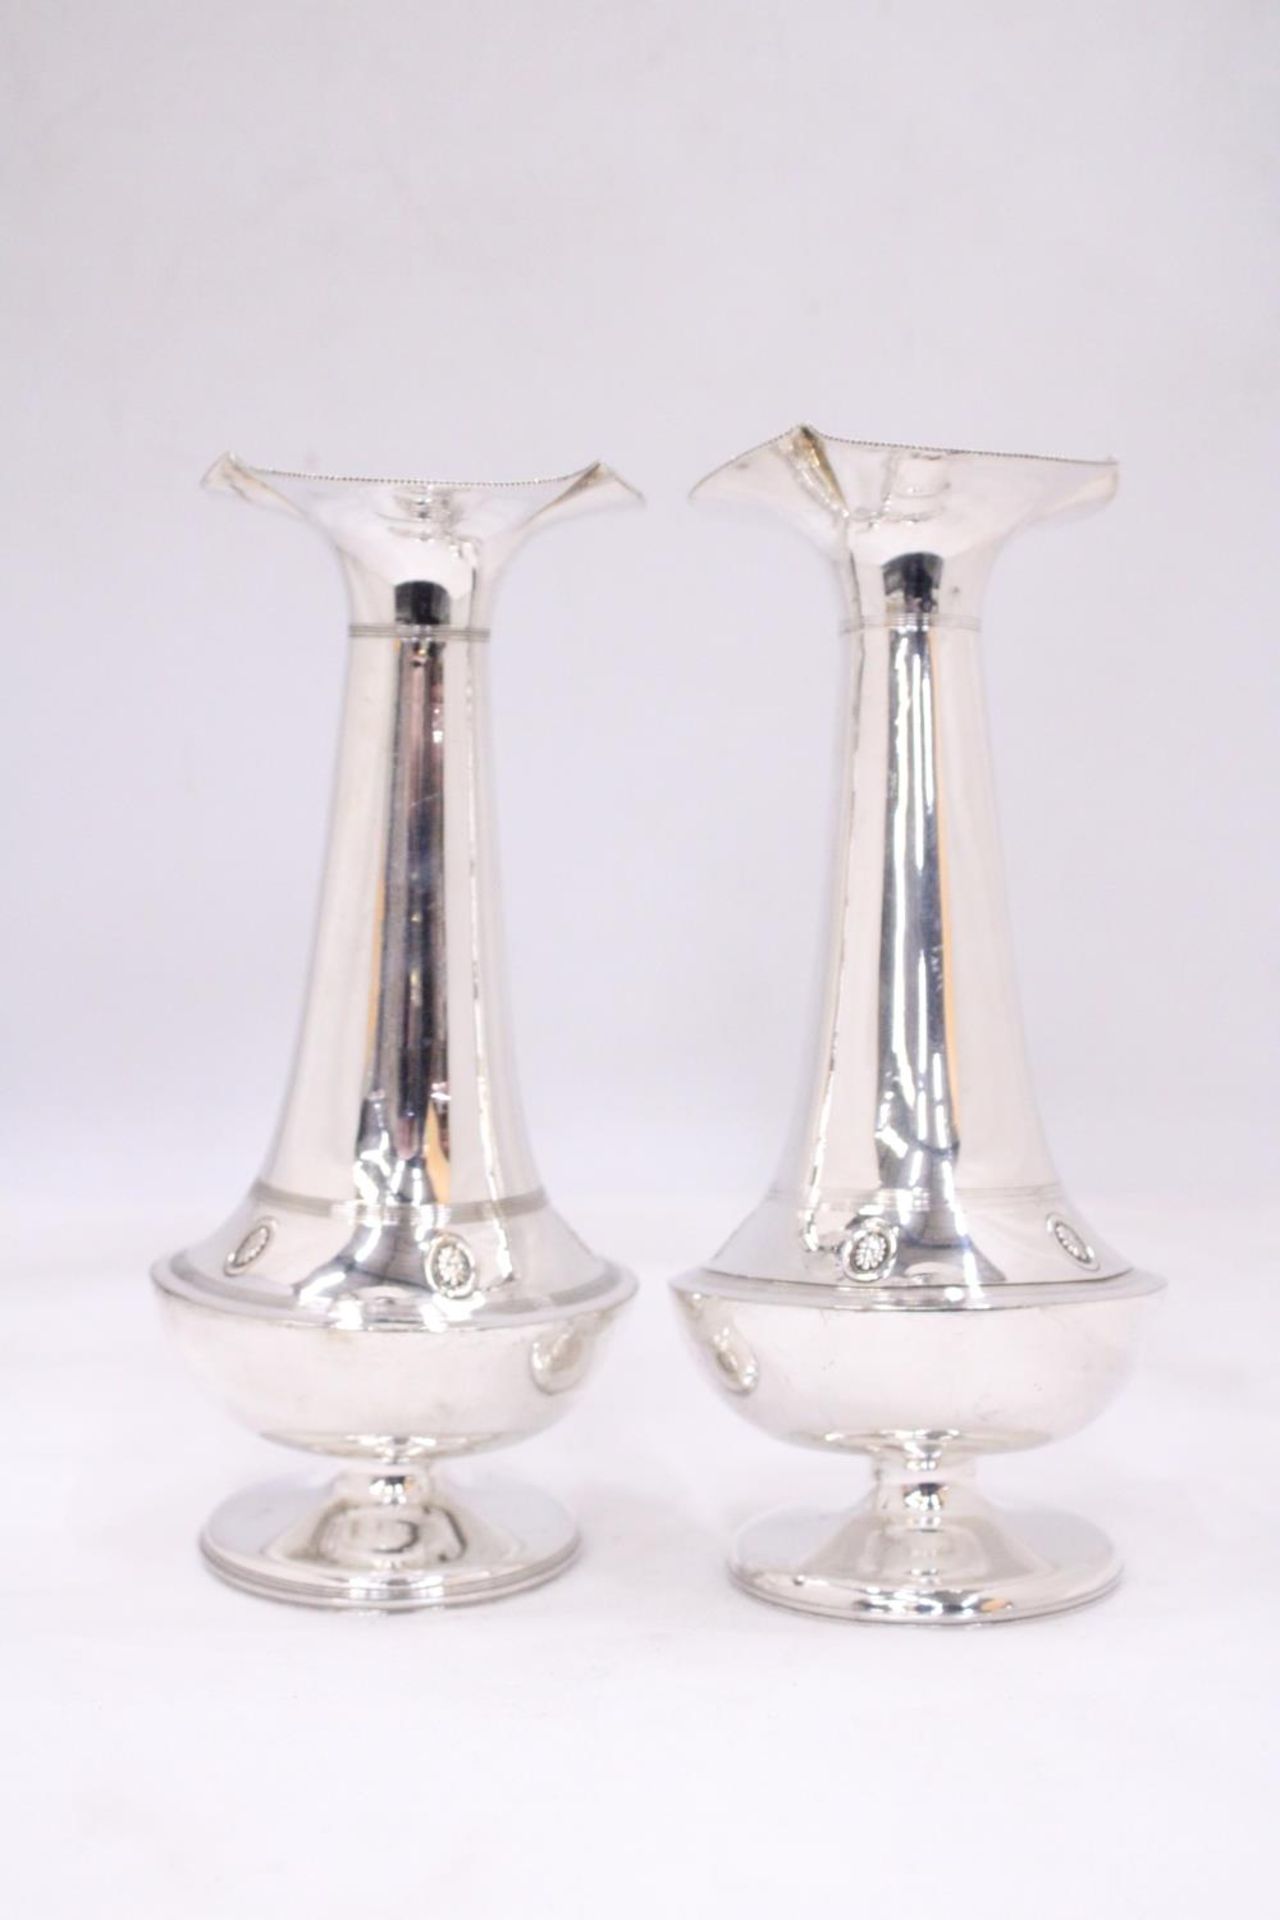 A PAIR OF VINTAGE SILVER PLATED "BUD" VASES - Image 3 of 4